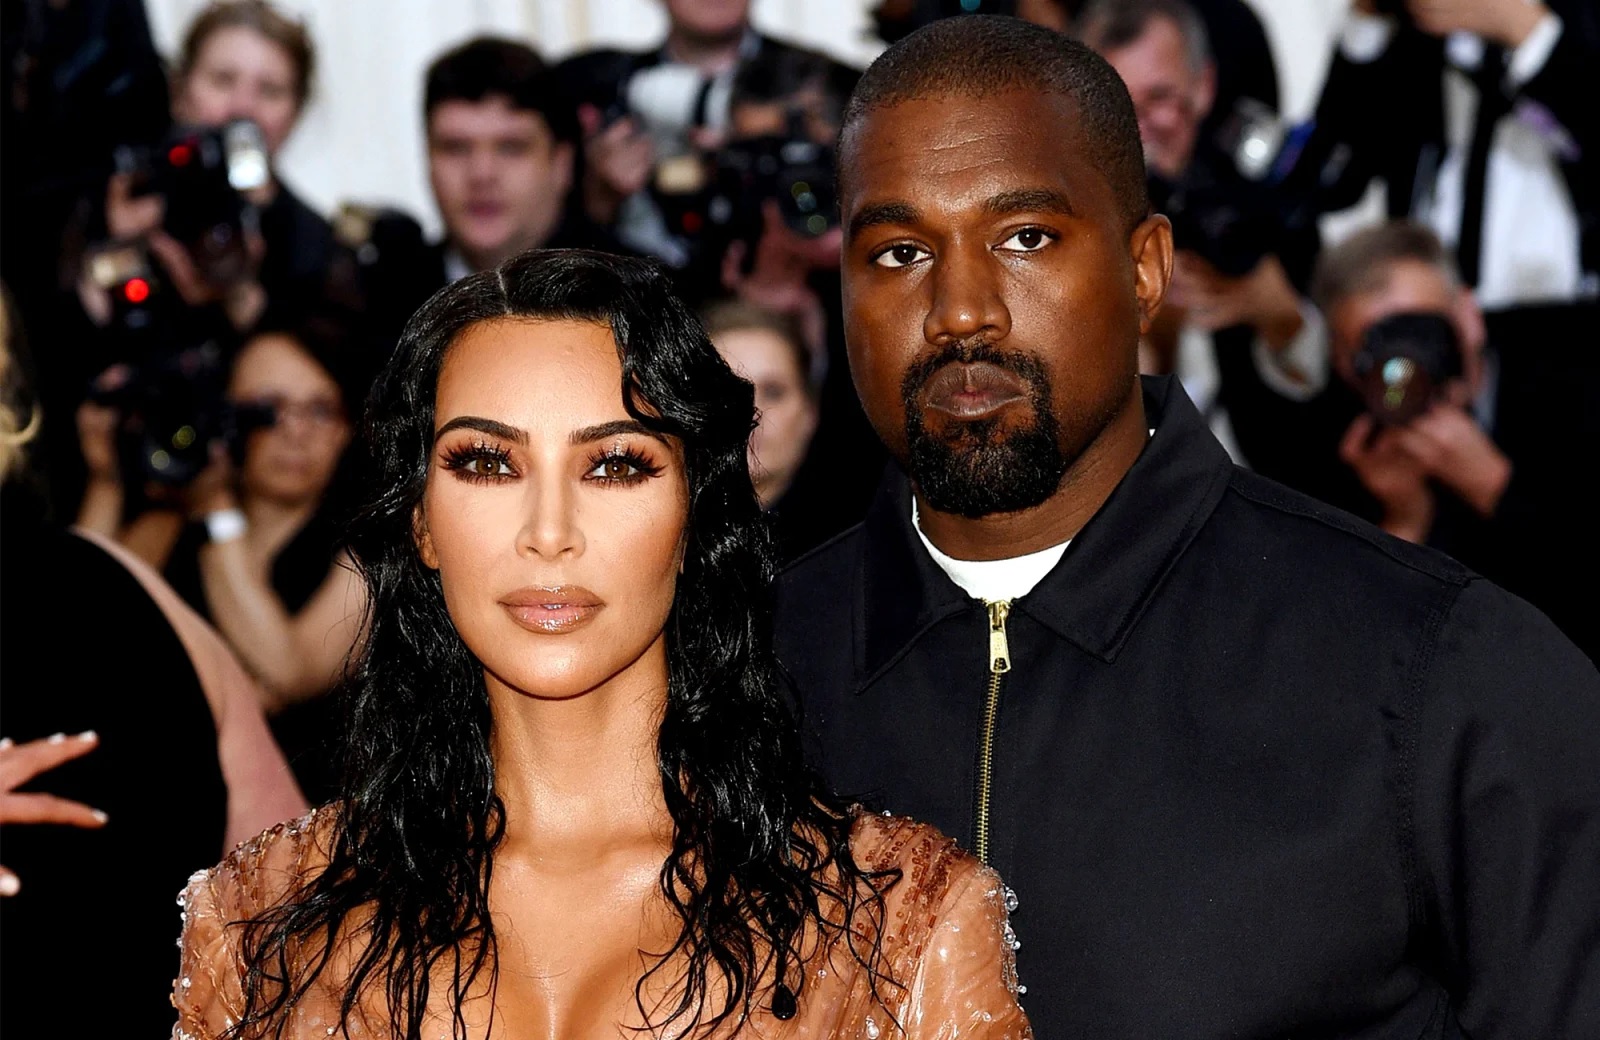 Is Kim Kardashian back with Kanye West after breakup with Pete Davidson?